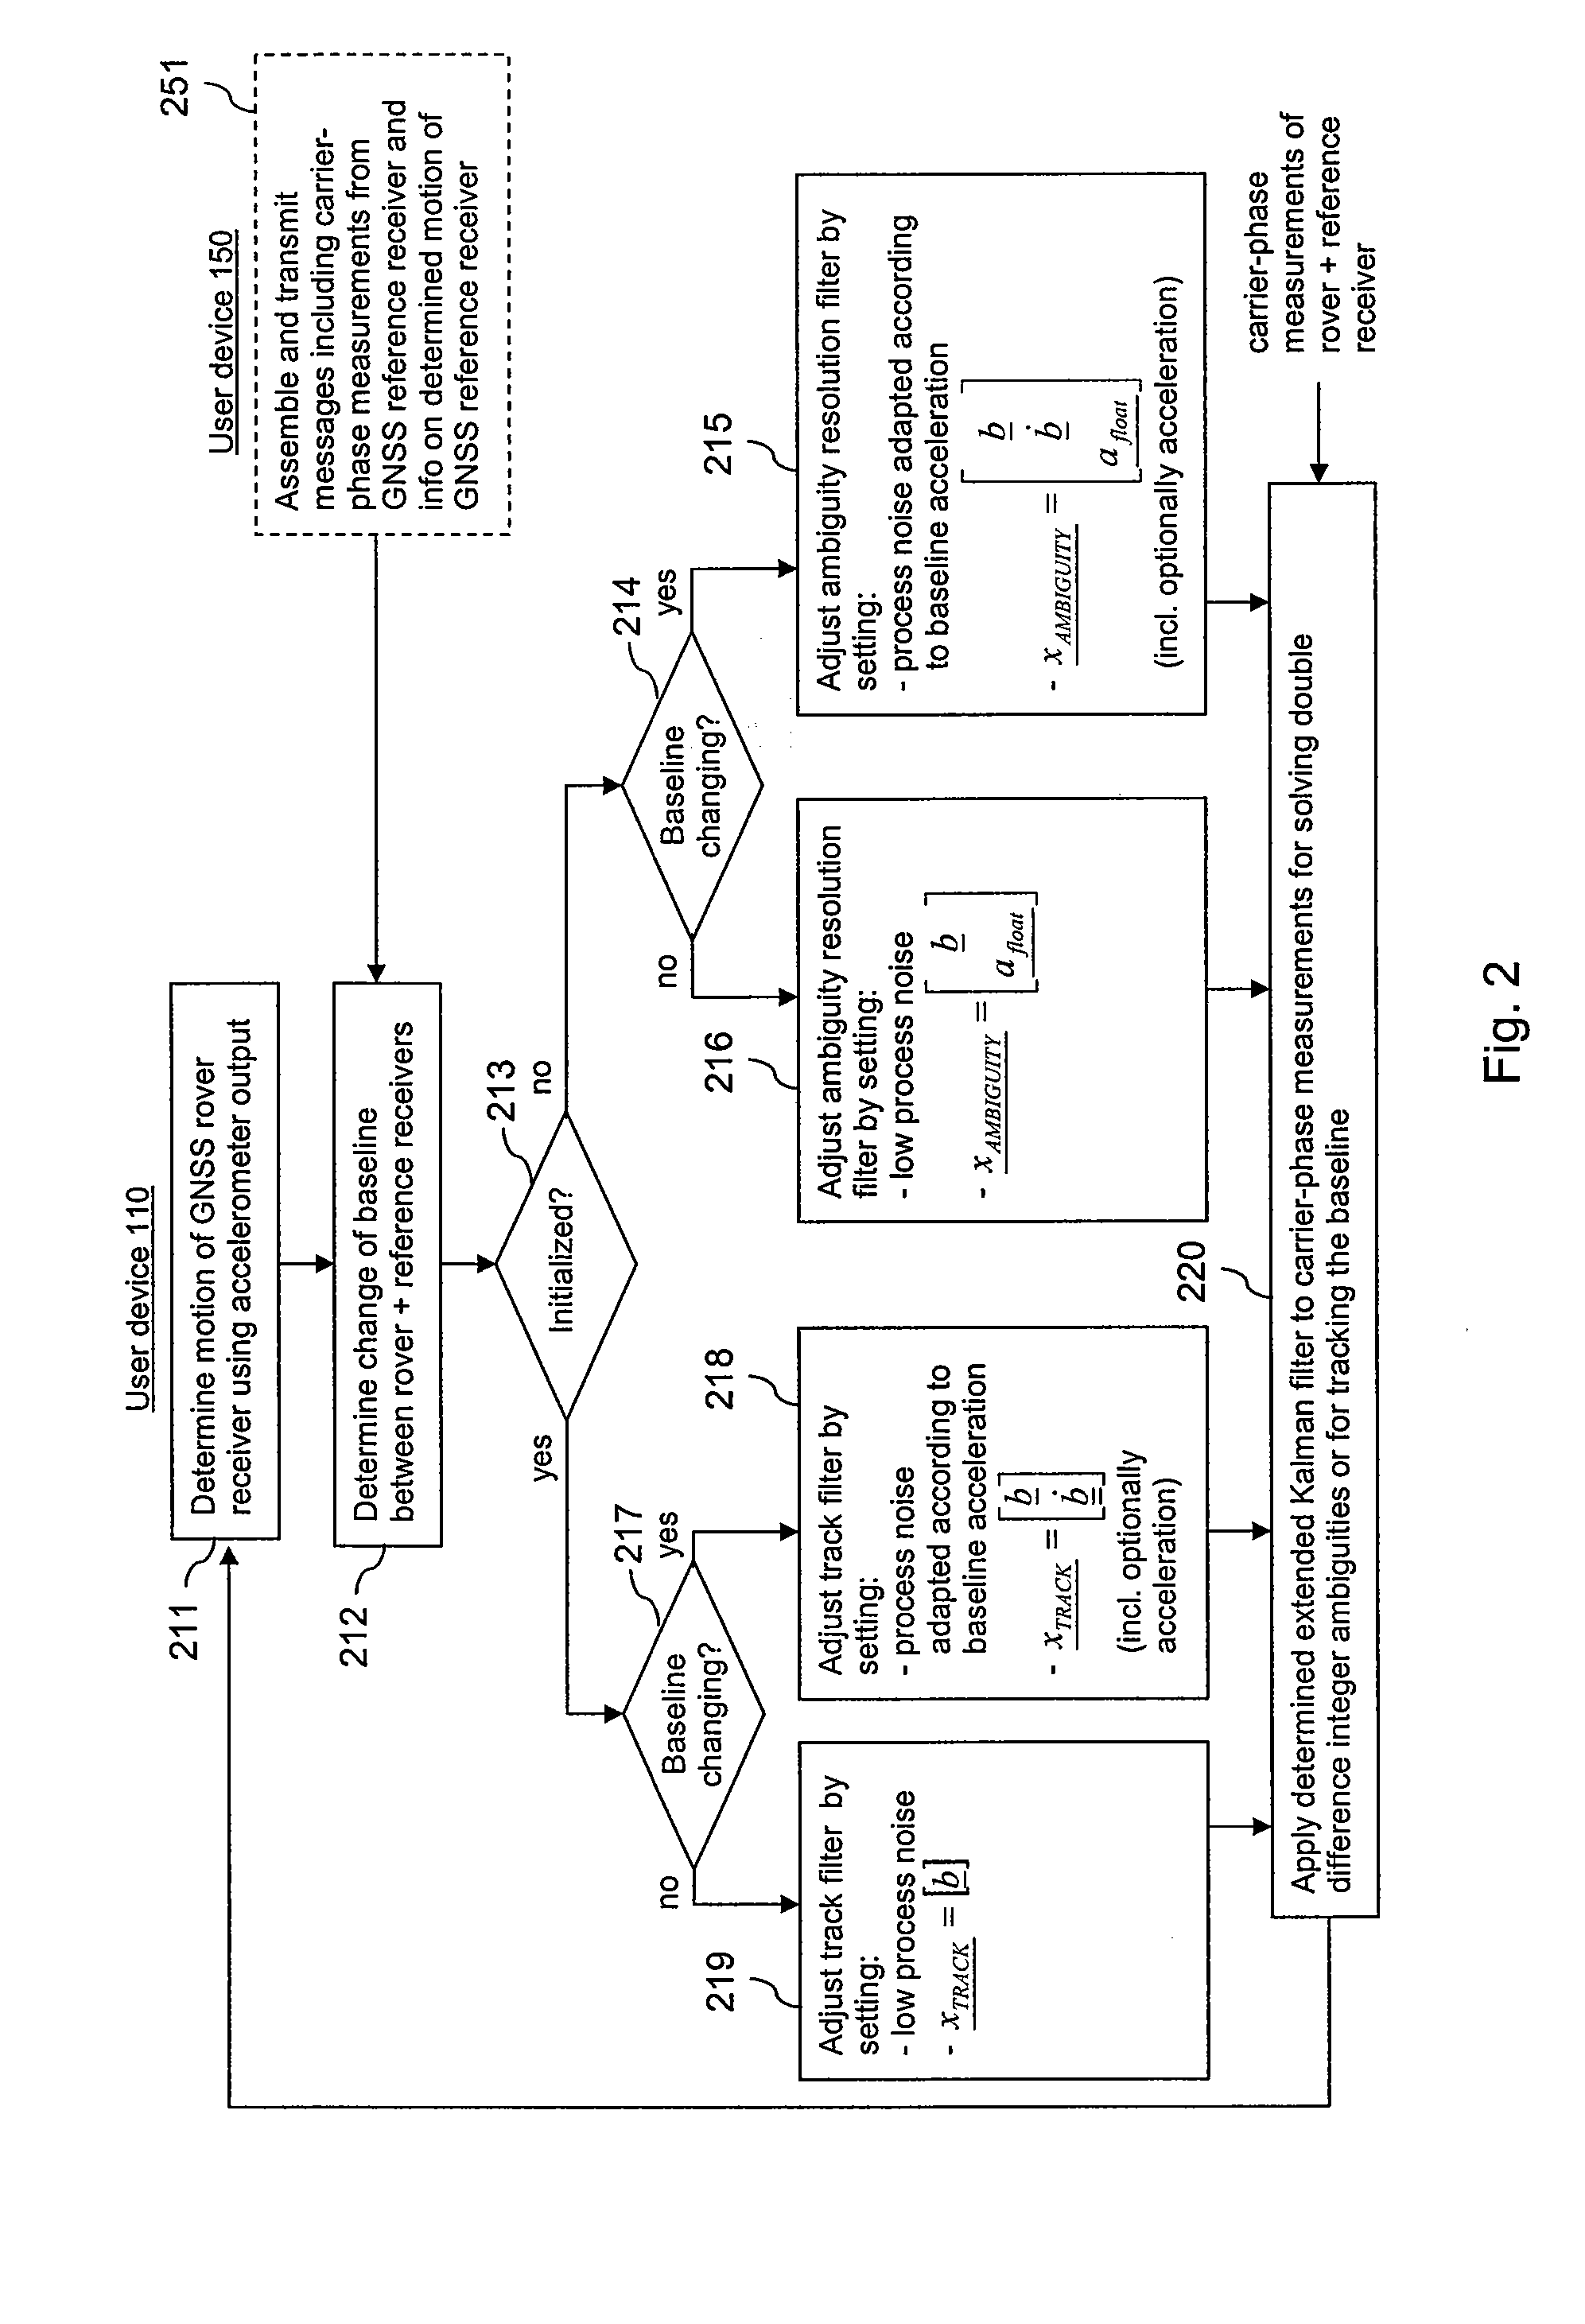 Determination of a Relative Position of a Satellite Signal Receiver